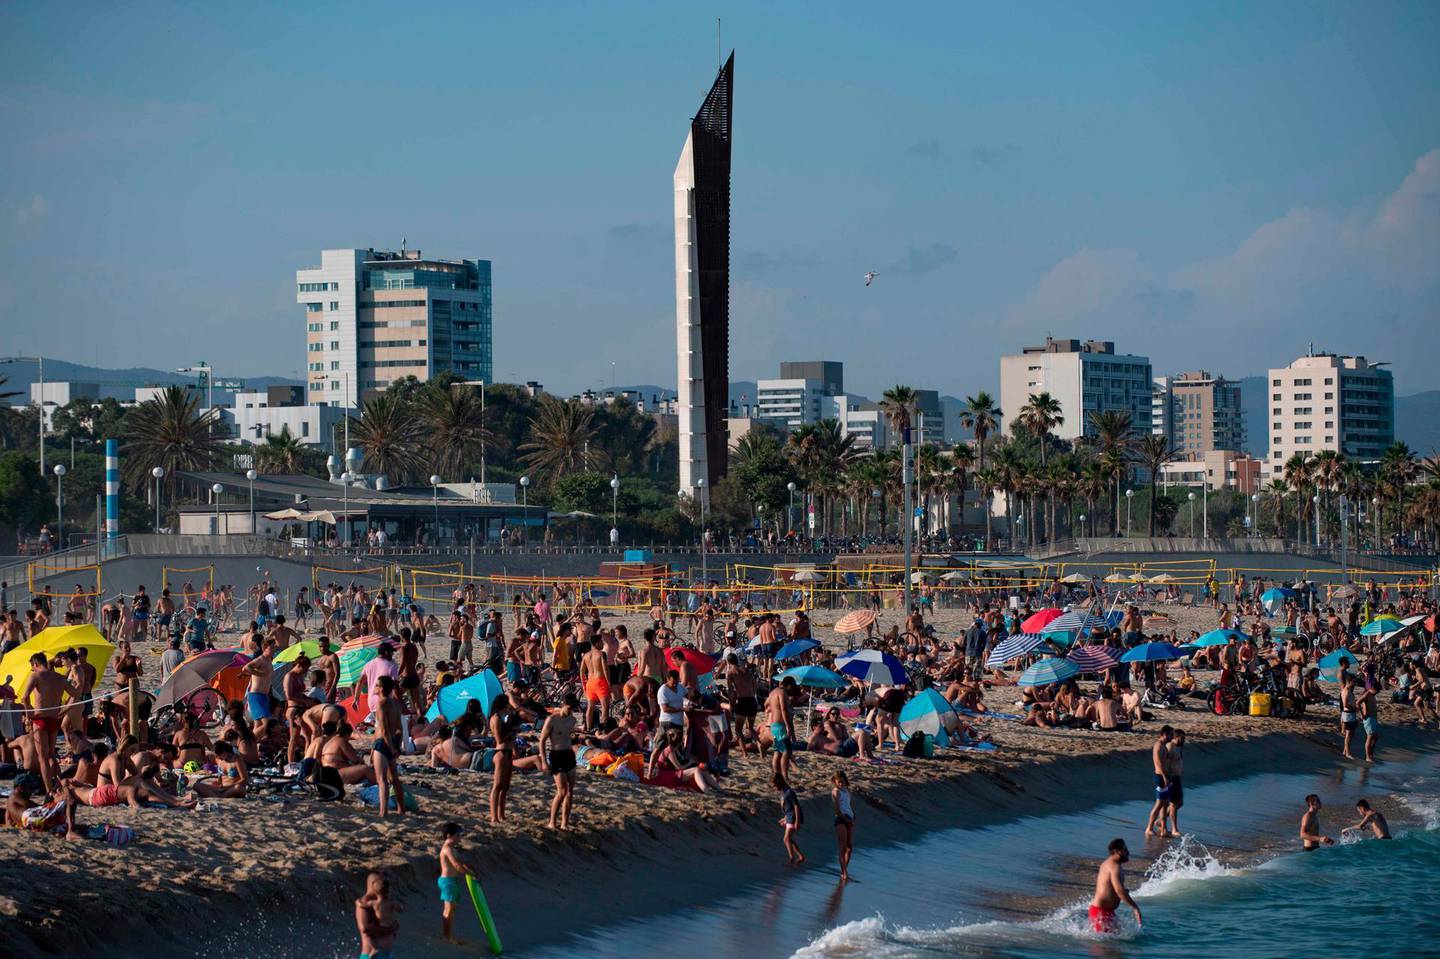 People enjoy a day at El Bogatell Beach in Barcelona on July 1, 2020.  The European Union reopened its borders to visitors from 15 countries but excluded the United States, where coronavirus deaths are spiking once again, six months after the first cluster was reported in China.  / AFP / Josep LAGO
